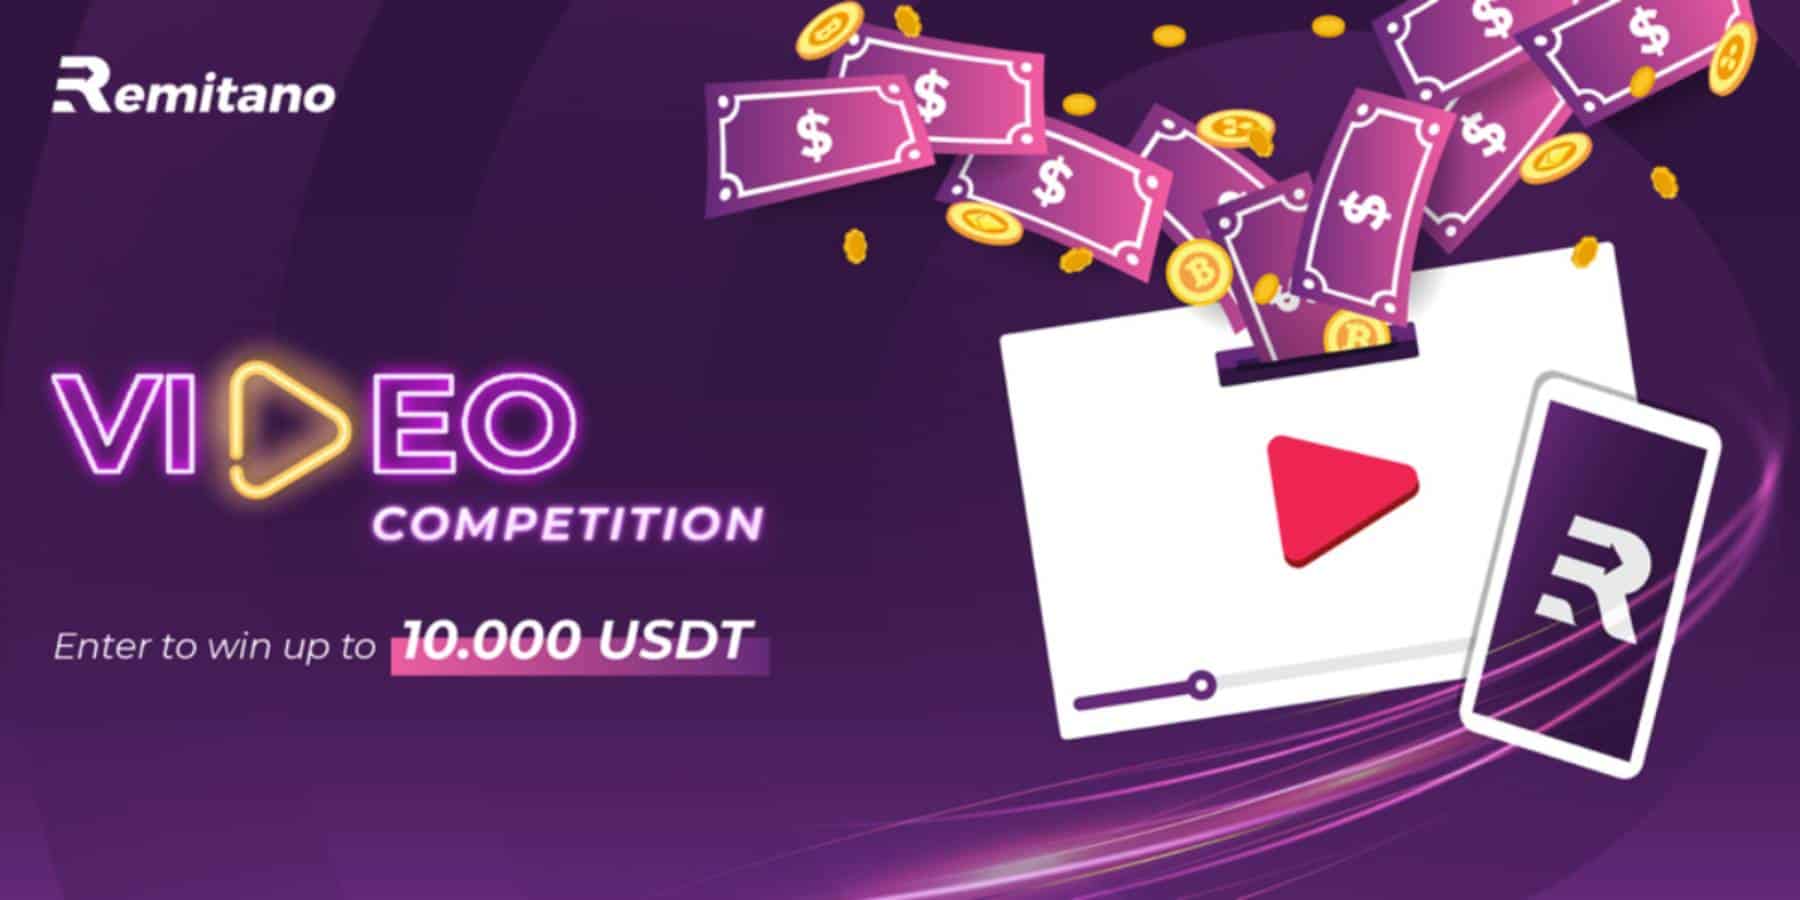 Remitano-lightning-league-–-youtube-video-competition-–-win-10k-usdt